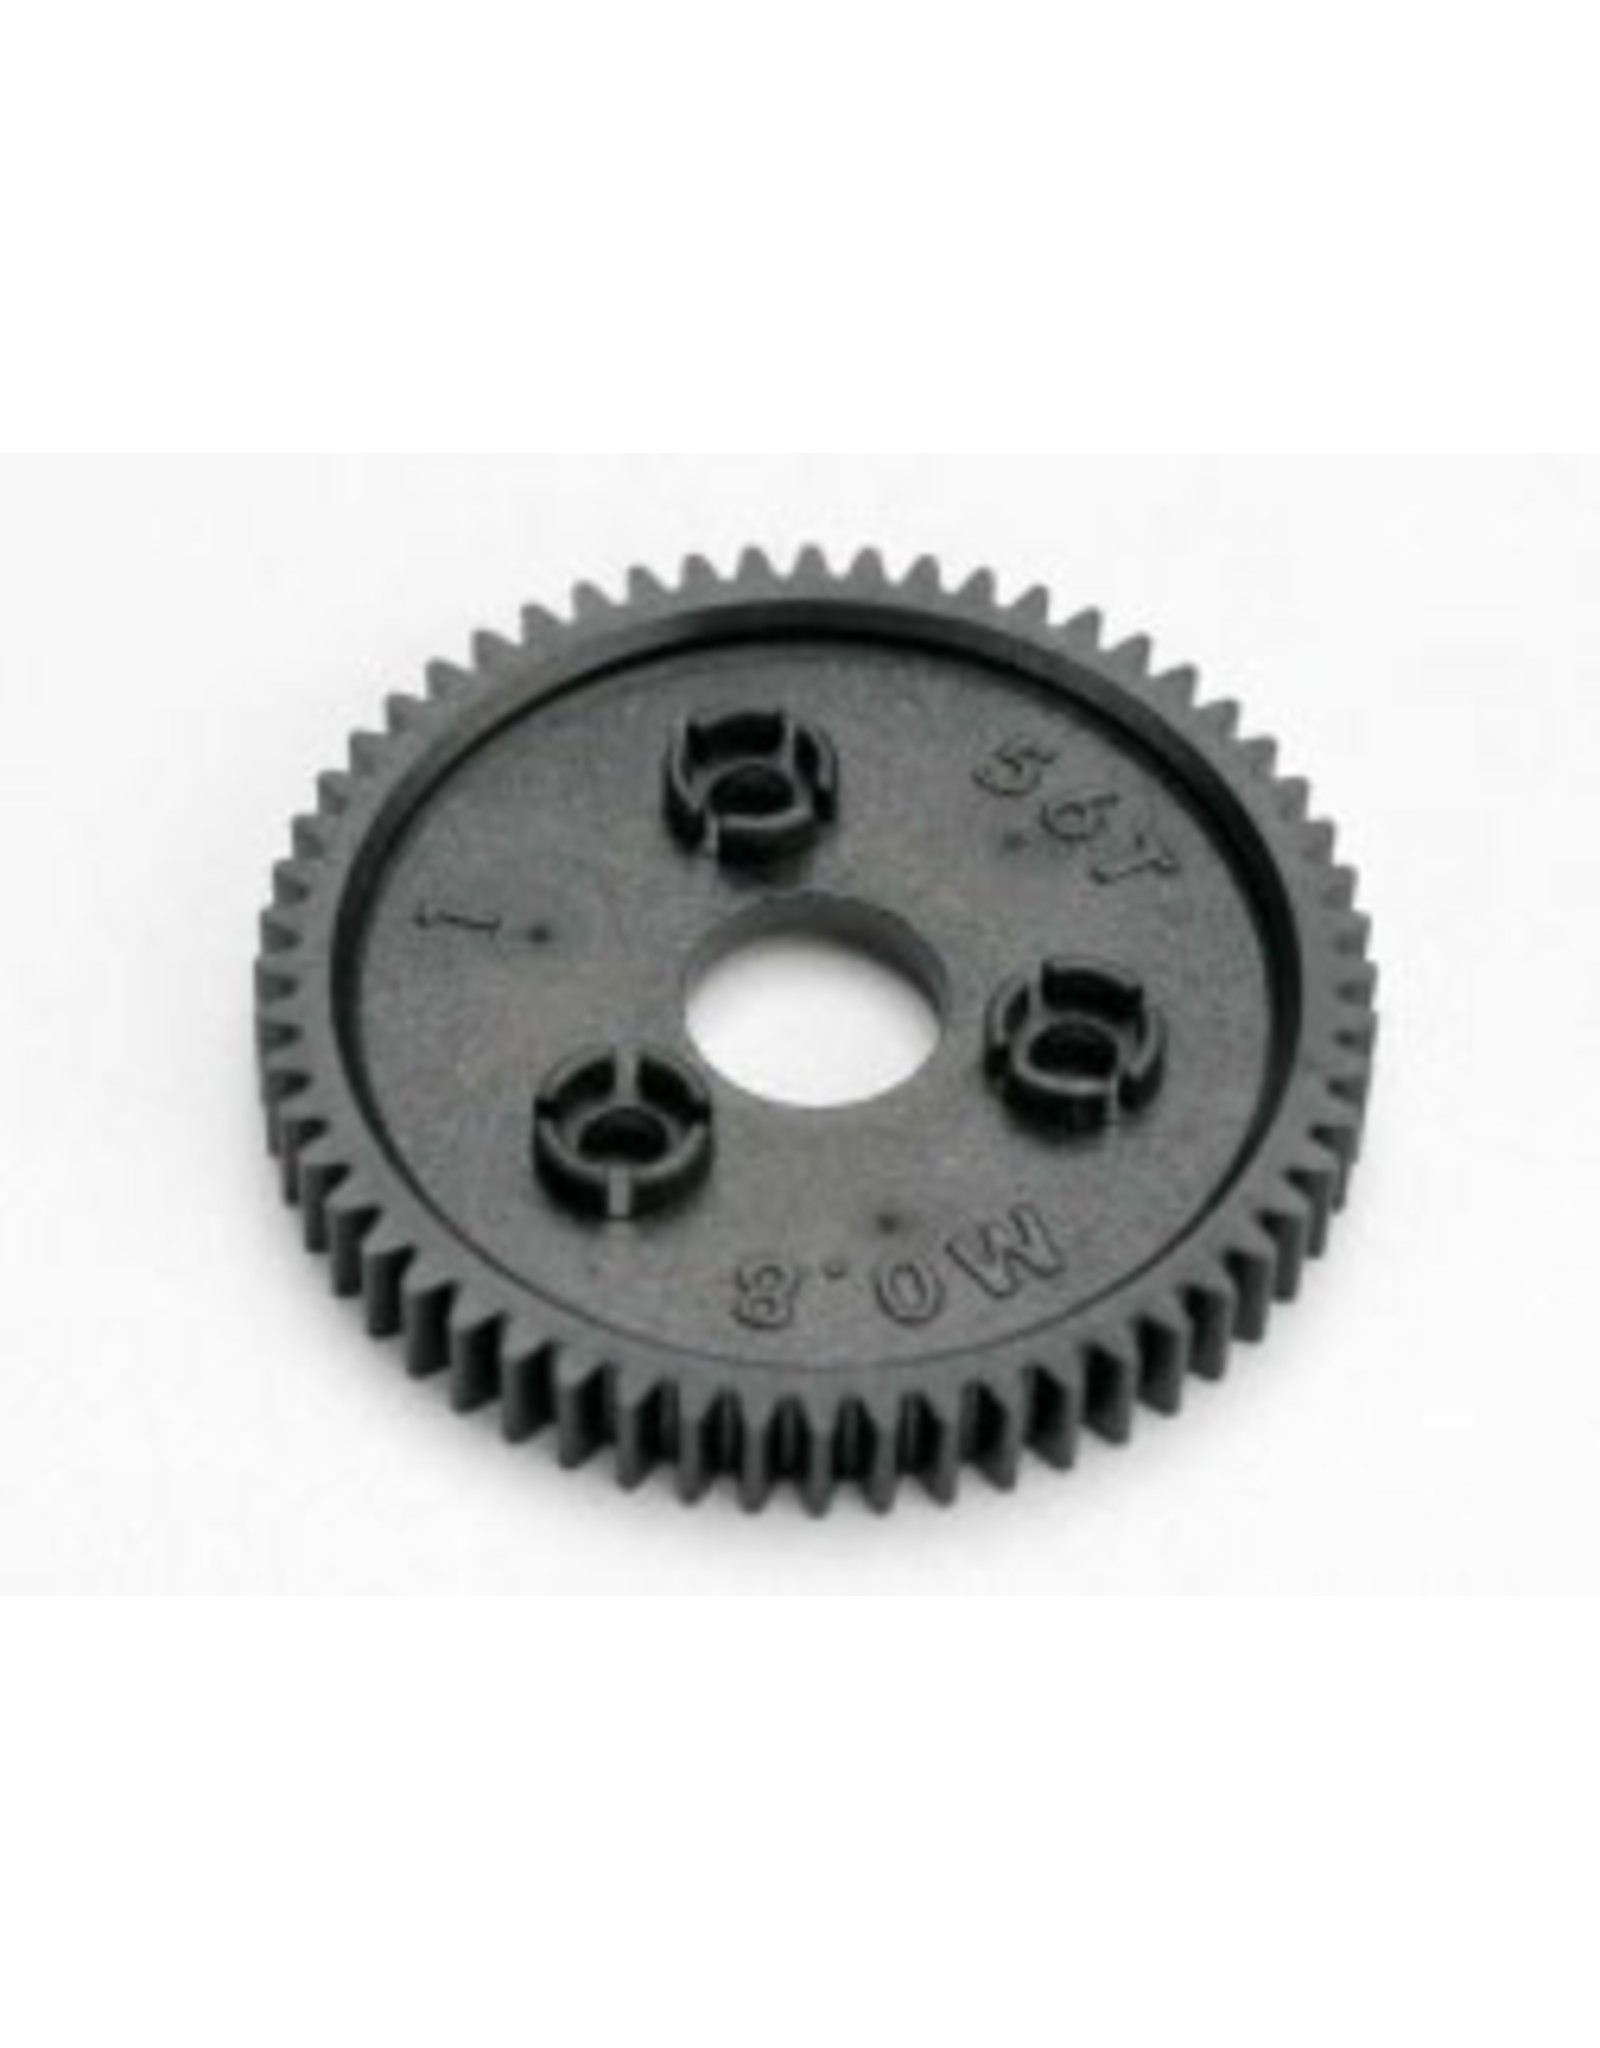 Traxxas [Spur gear, 56-tooth (0.8 metric pitch, compatible with 32-pitch)] Spur gear, 56-tooth (0.8 metric pitch, compatible with 32-pitch)